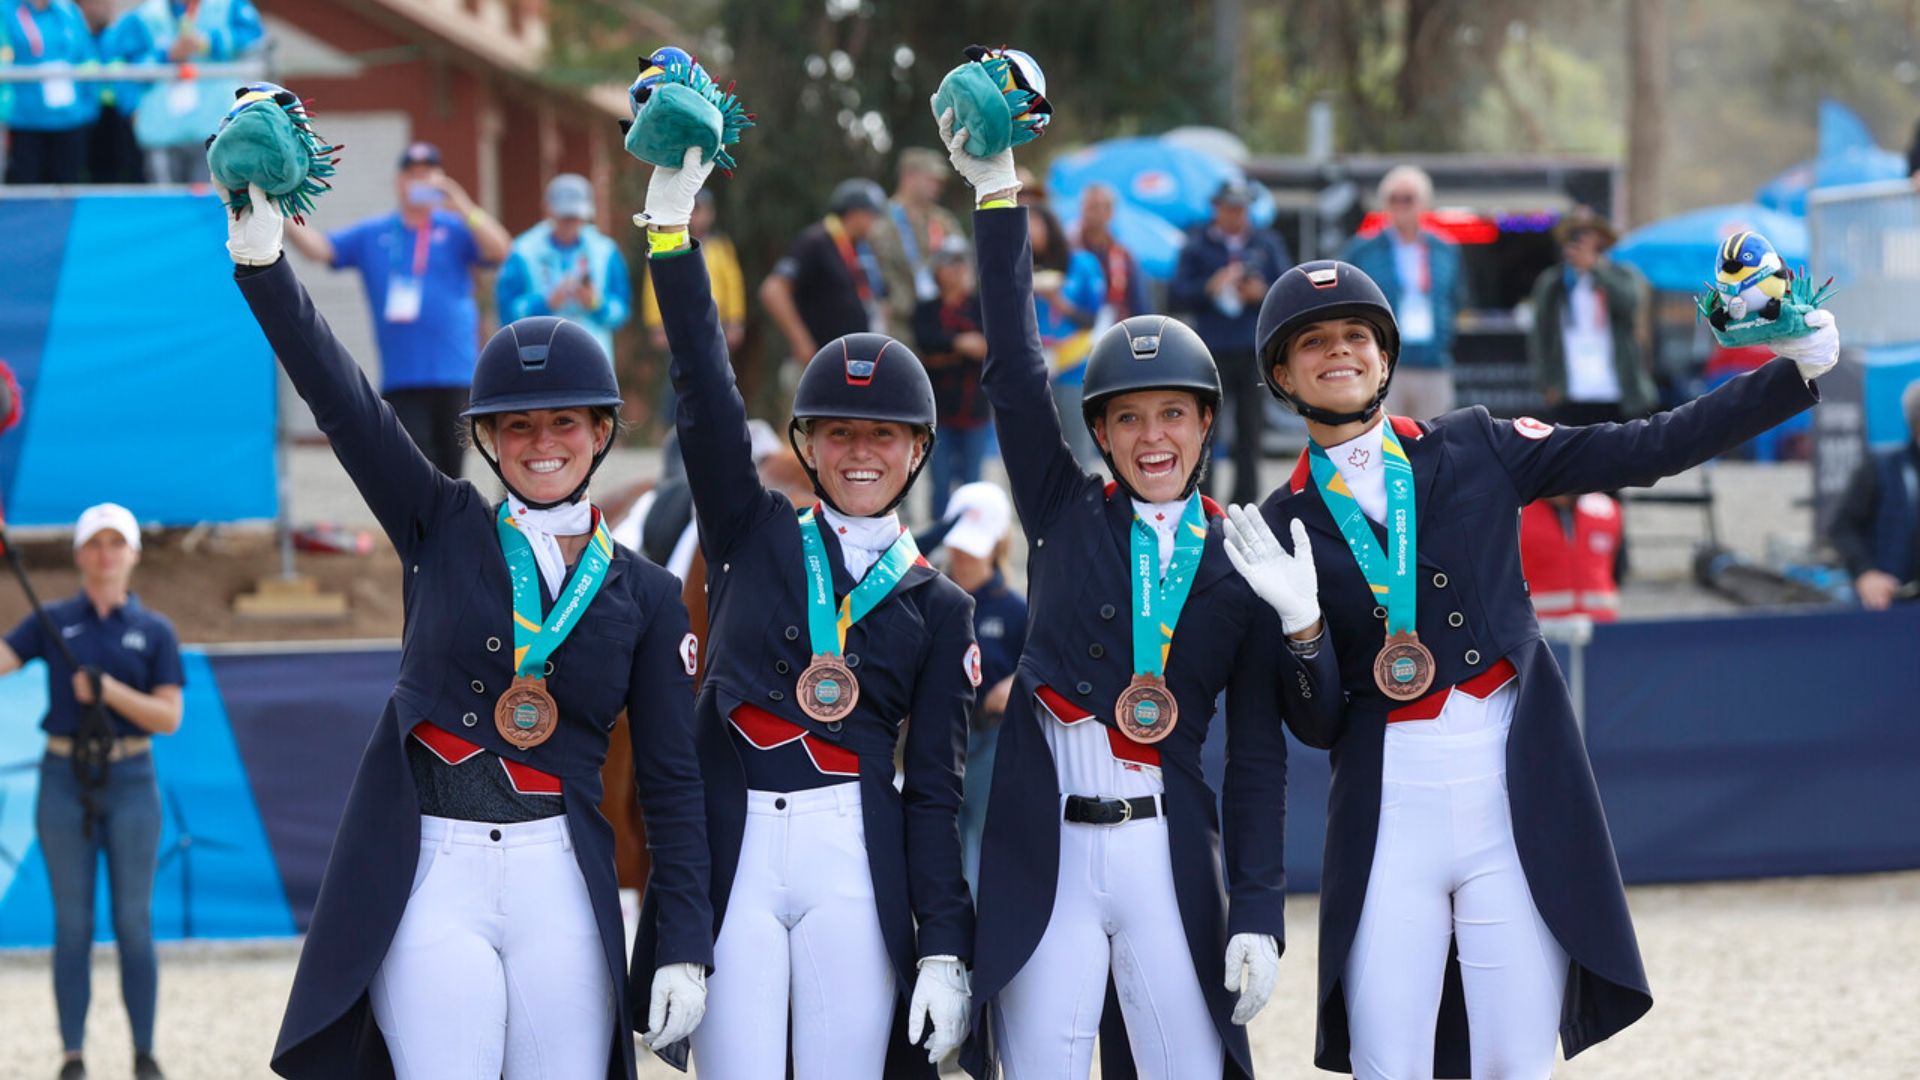 Equestrian dressage: The United States wins gold in team event